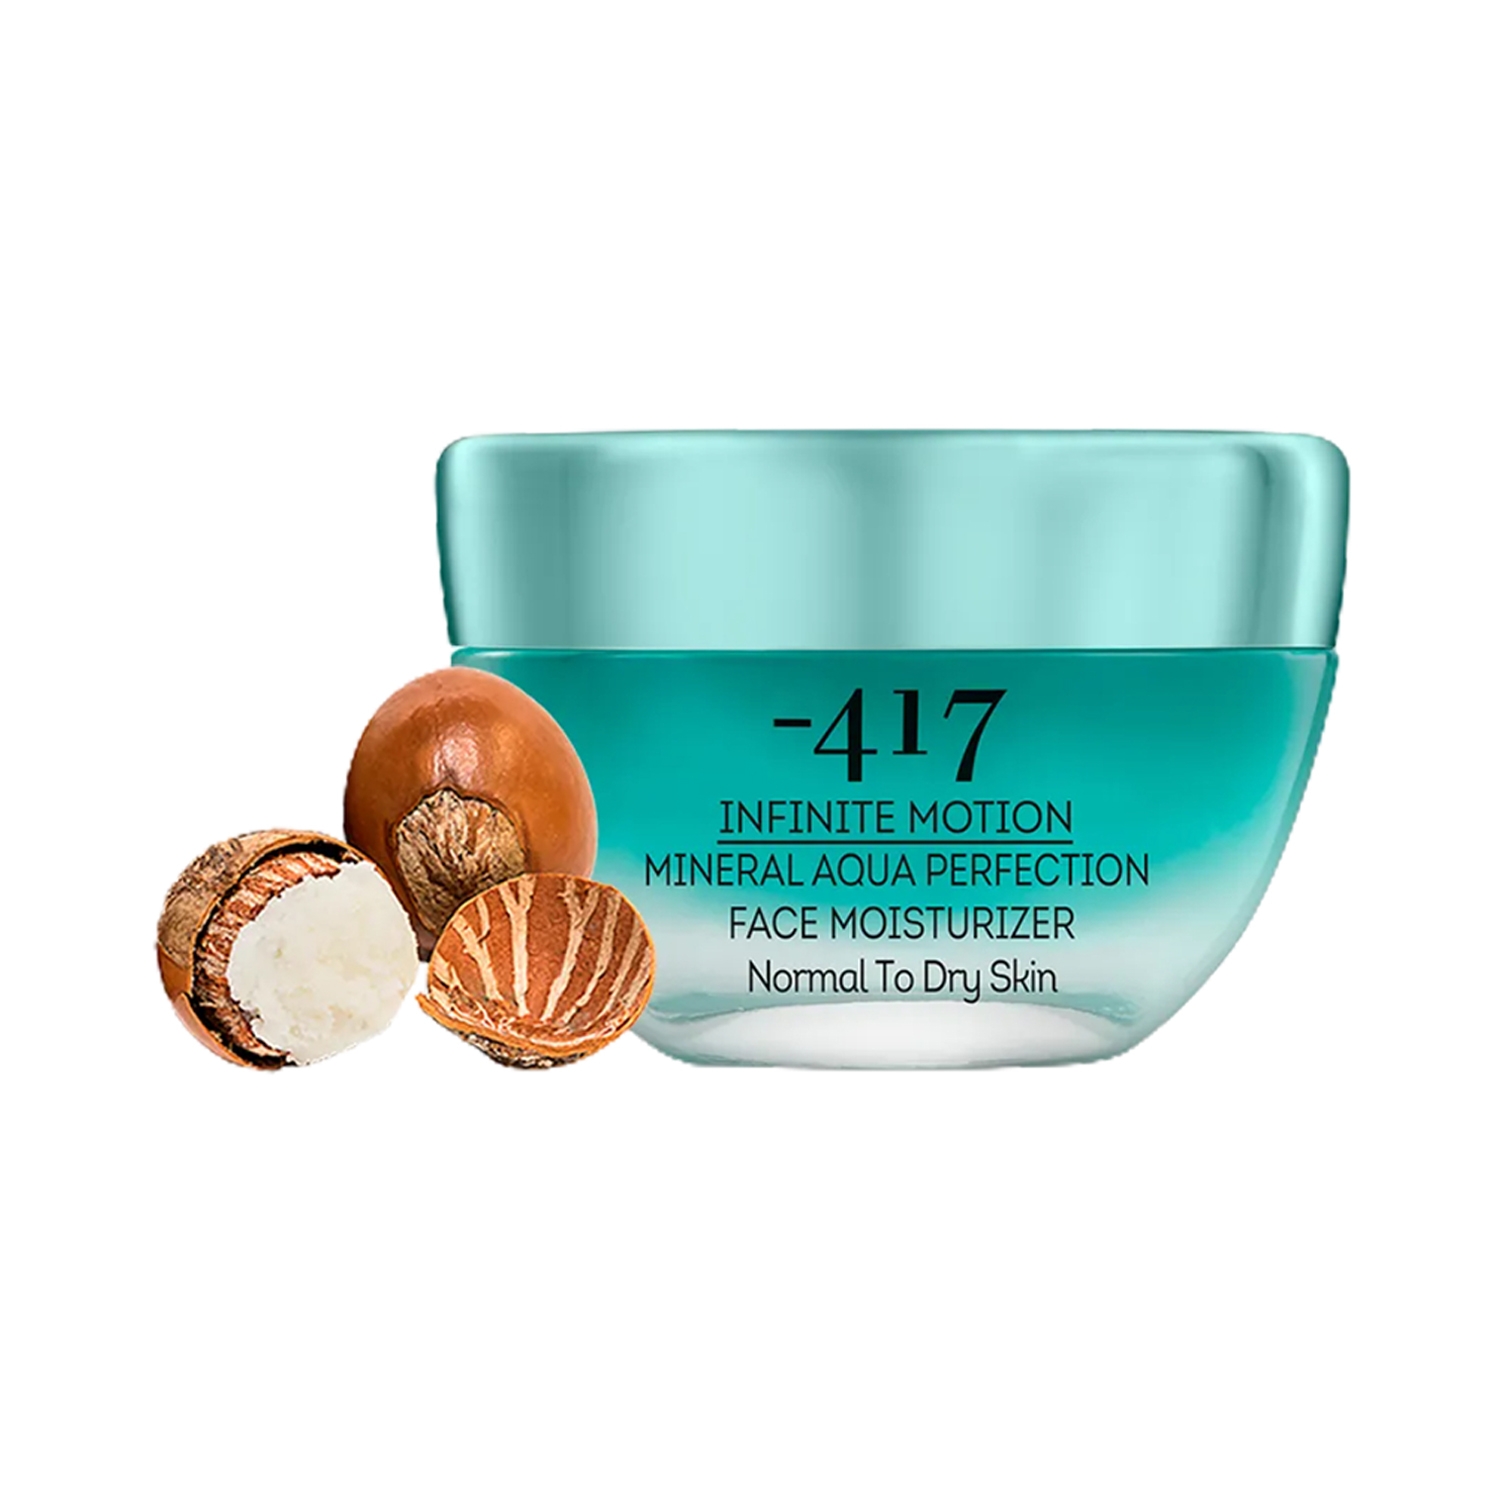 Minus 417 | Minus 417 Infinite Motion Mineral Aqua Perfection Face Moisturizer For Normal To Dry Skin (50ml)